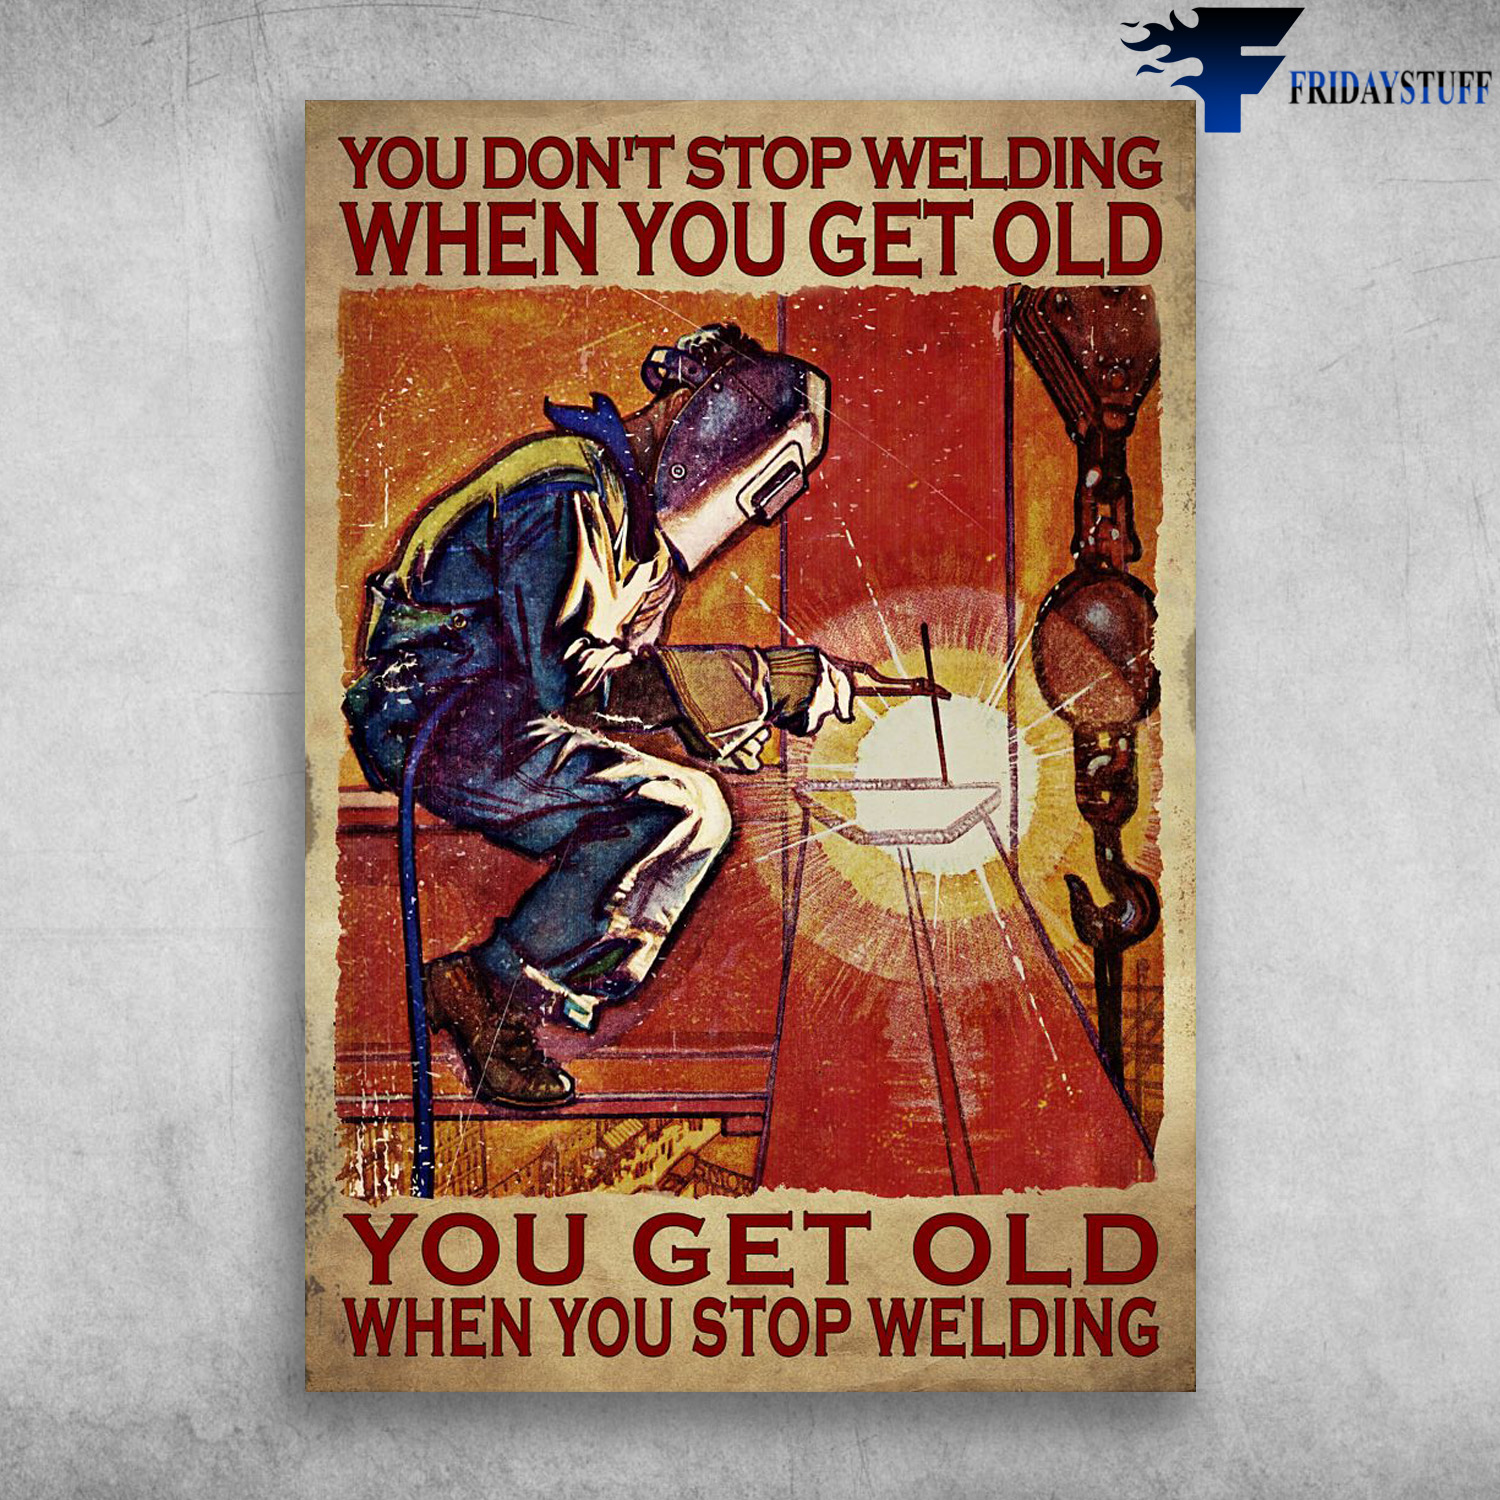 Welding Man - You Don't Stop Welding When You Get Old, You Get Old When You Stop Welding